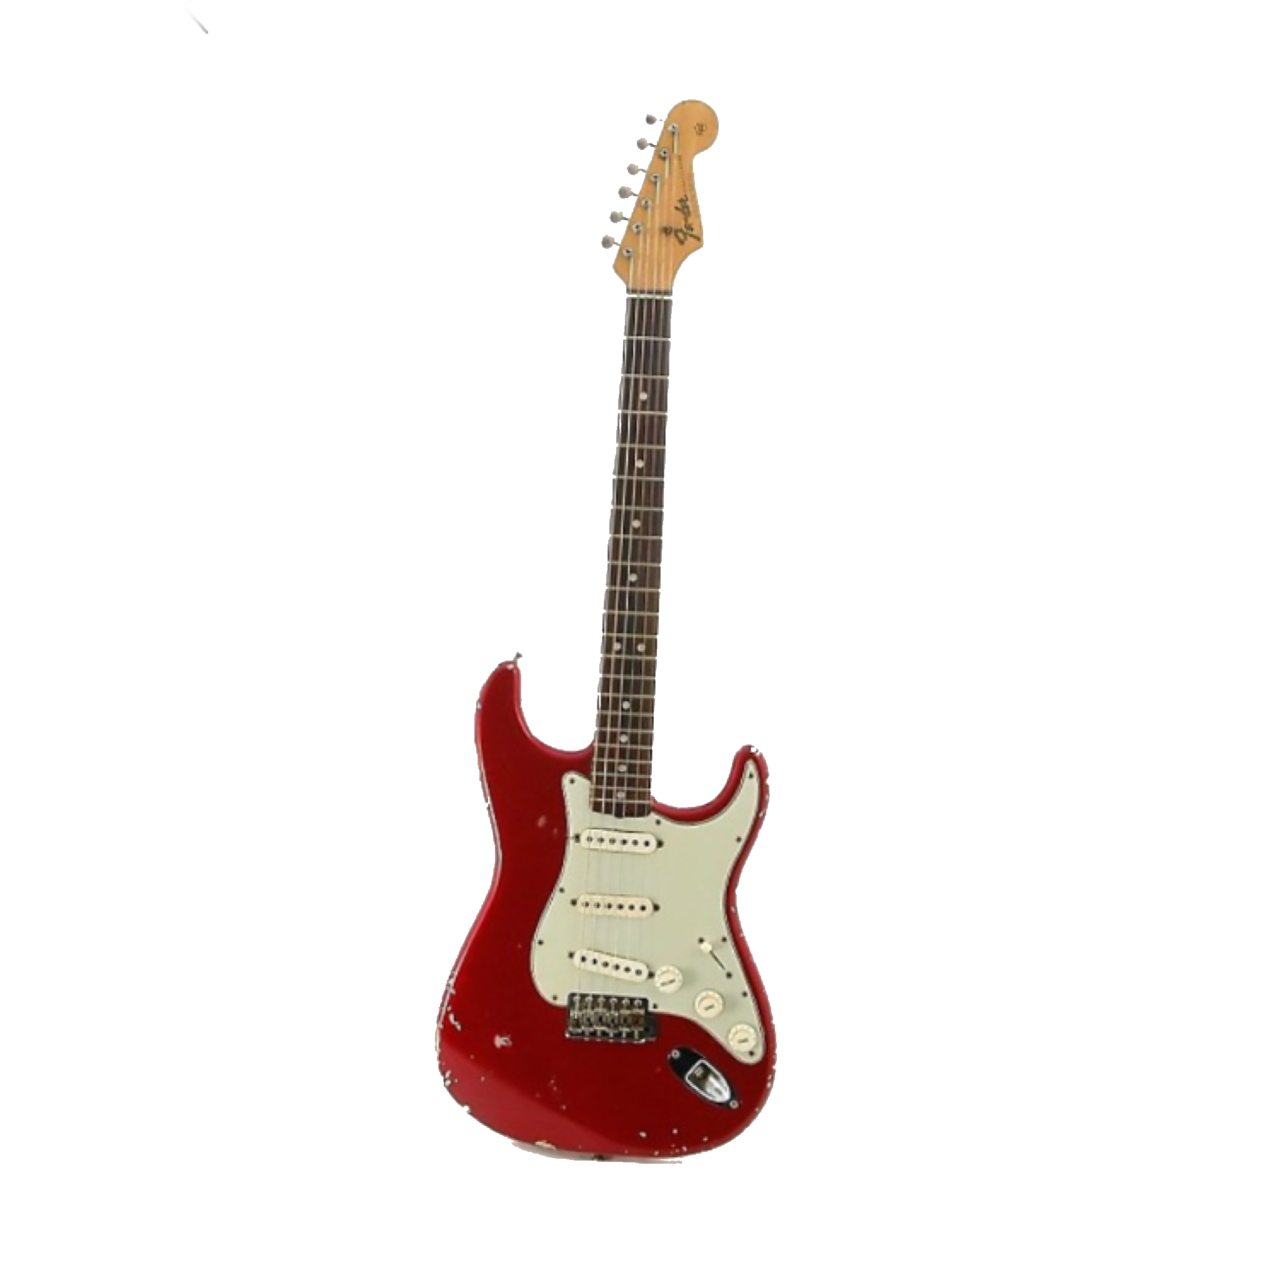 Guitar Electric Red PNG Image High Quality PNG Image